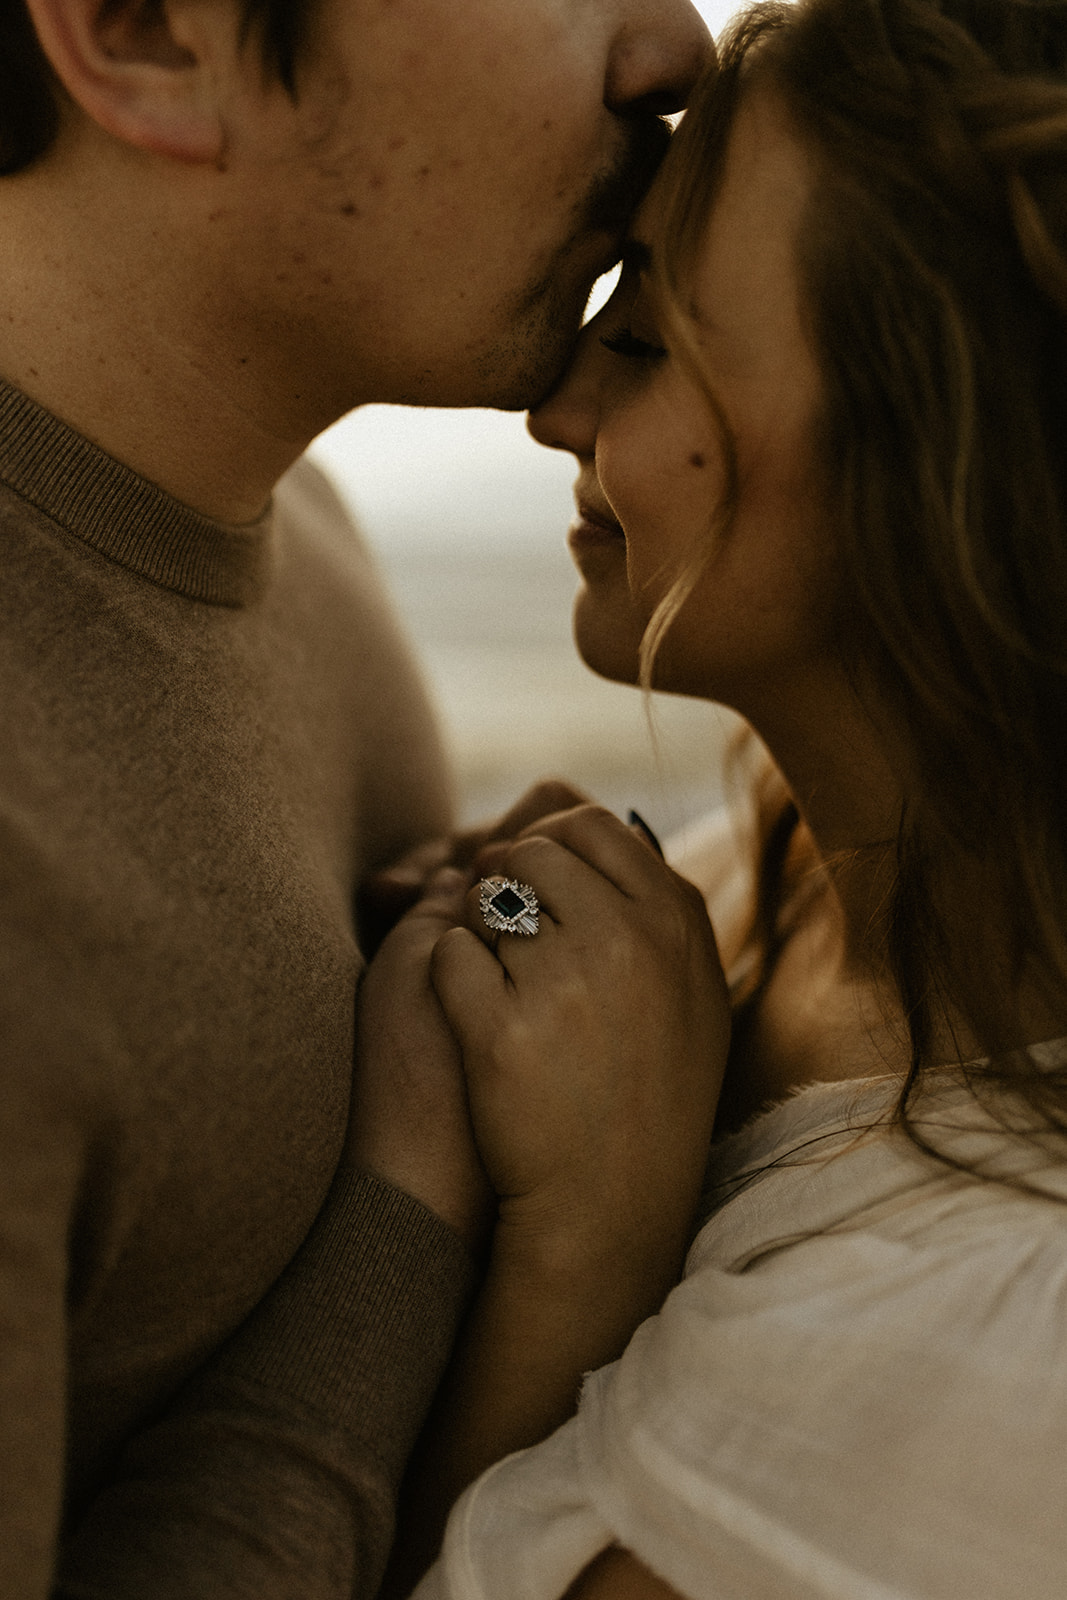 A man kissing his fiance's forehead while she closes her eyes and smiles